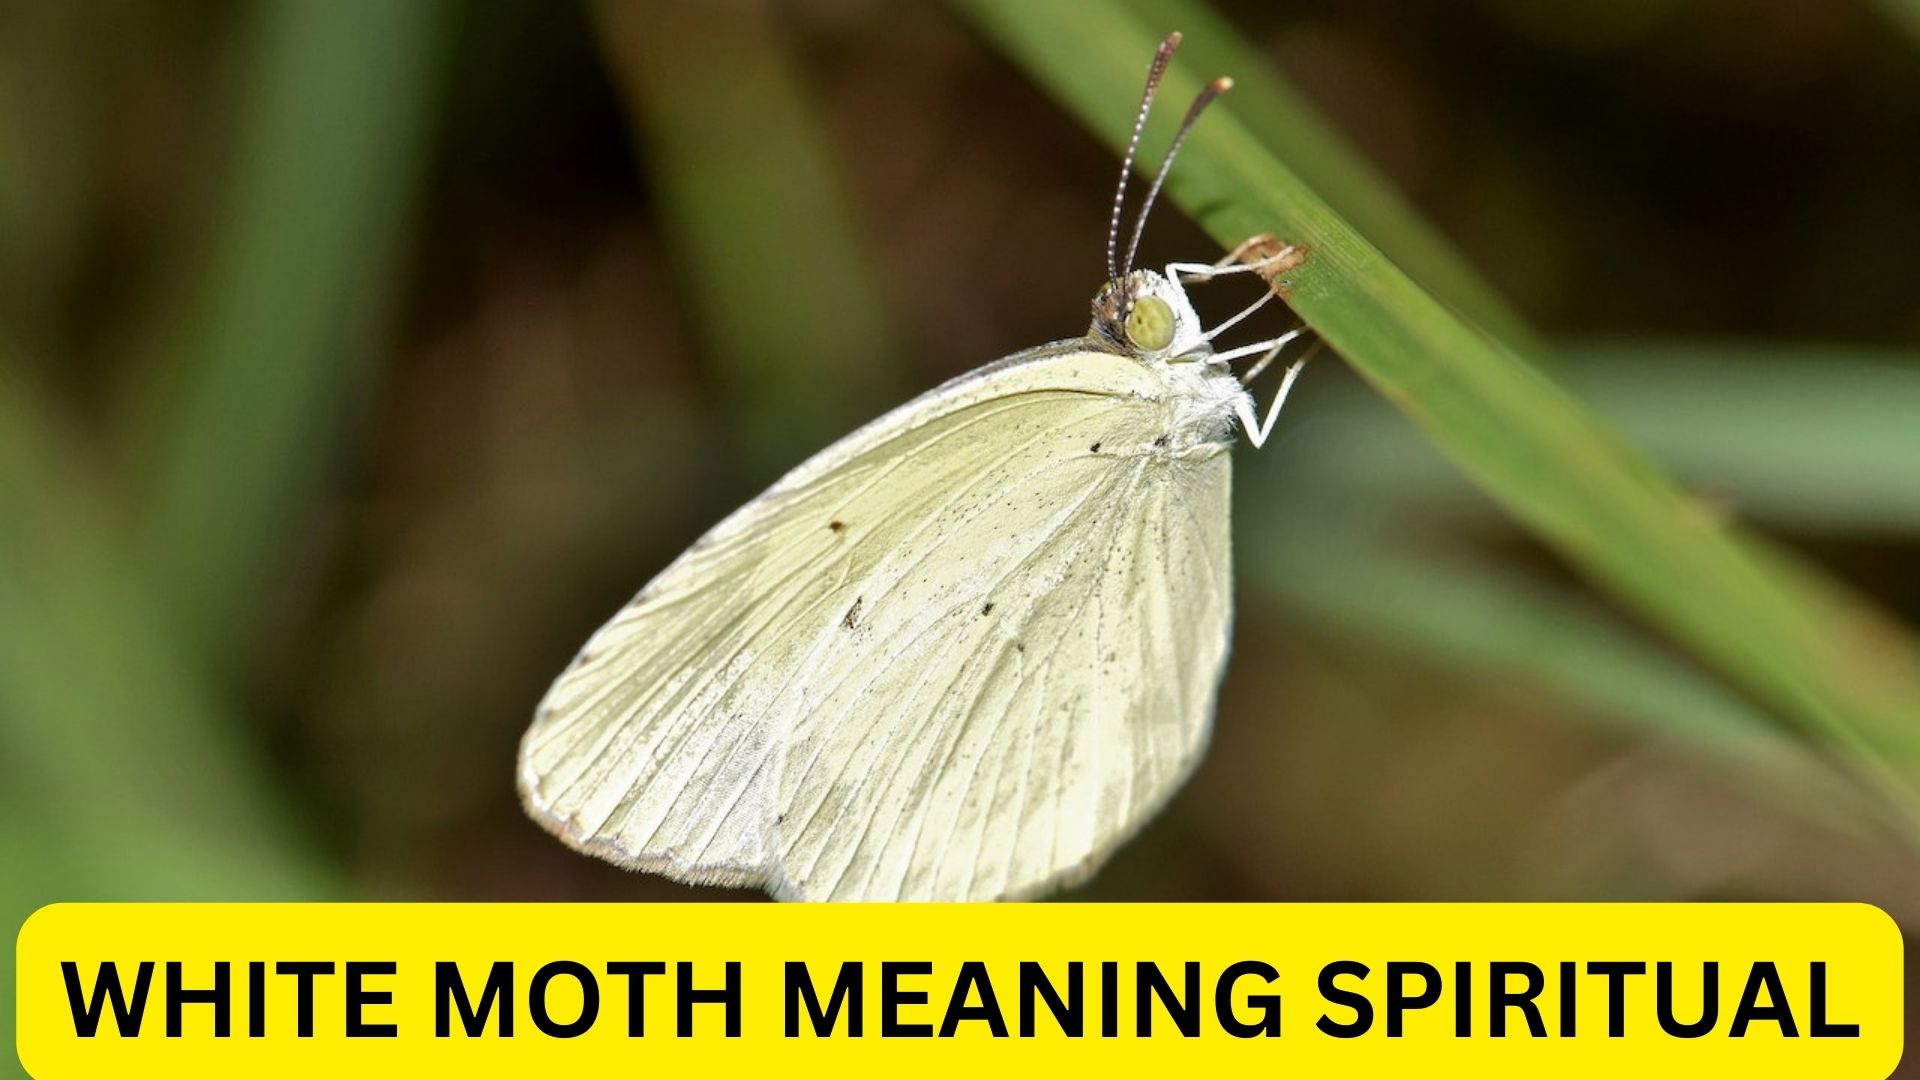 White Moth Meaning Spiritual - Good Health And Peace